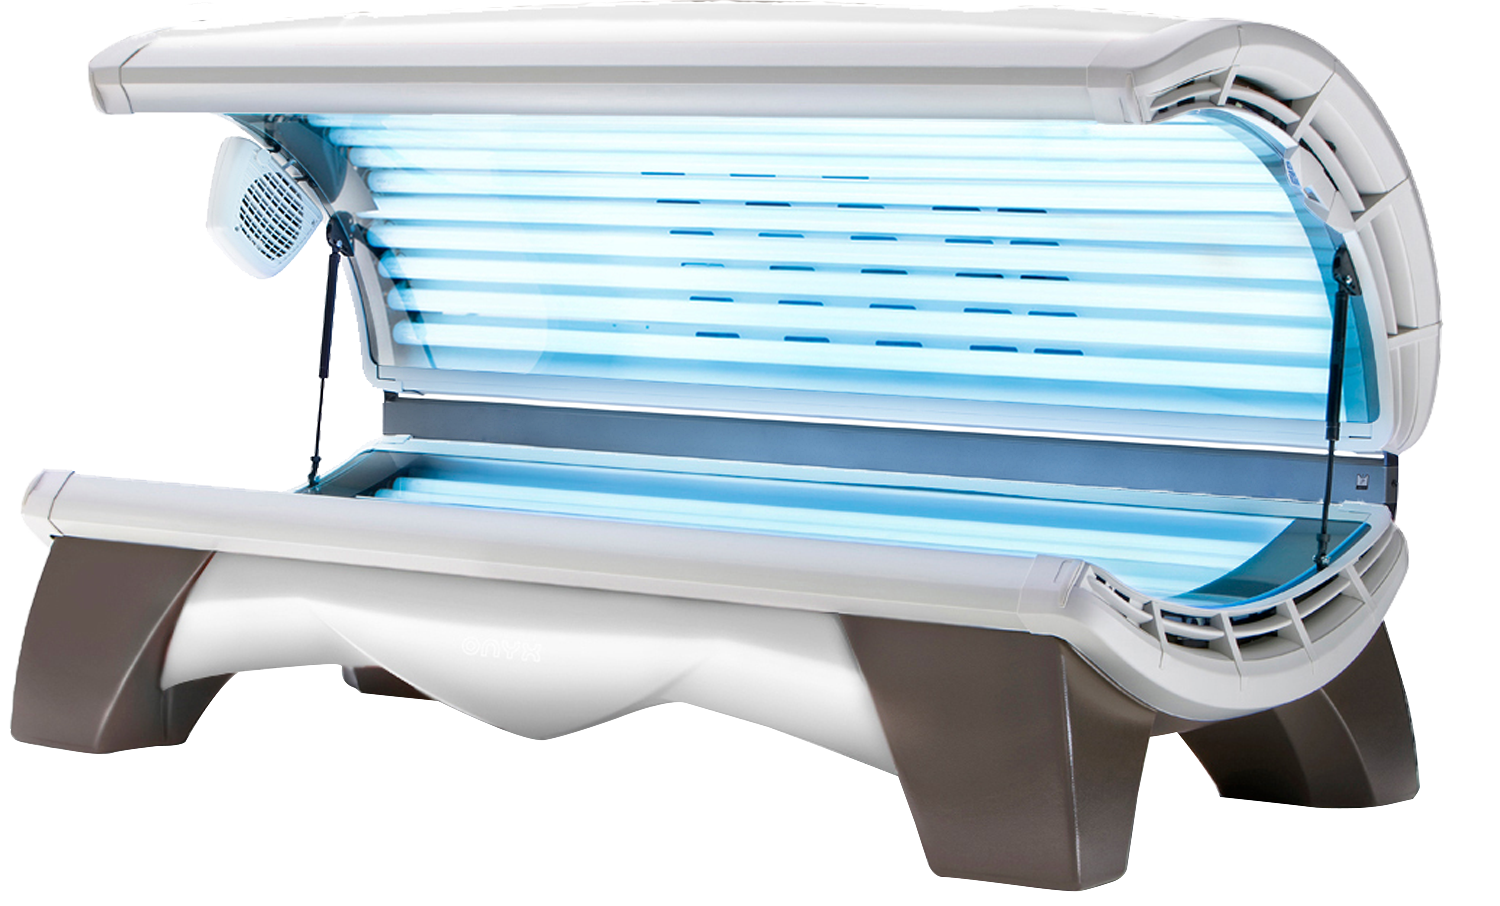 A Jade Tanning Bed With Blue Light and Legs